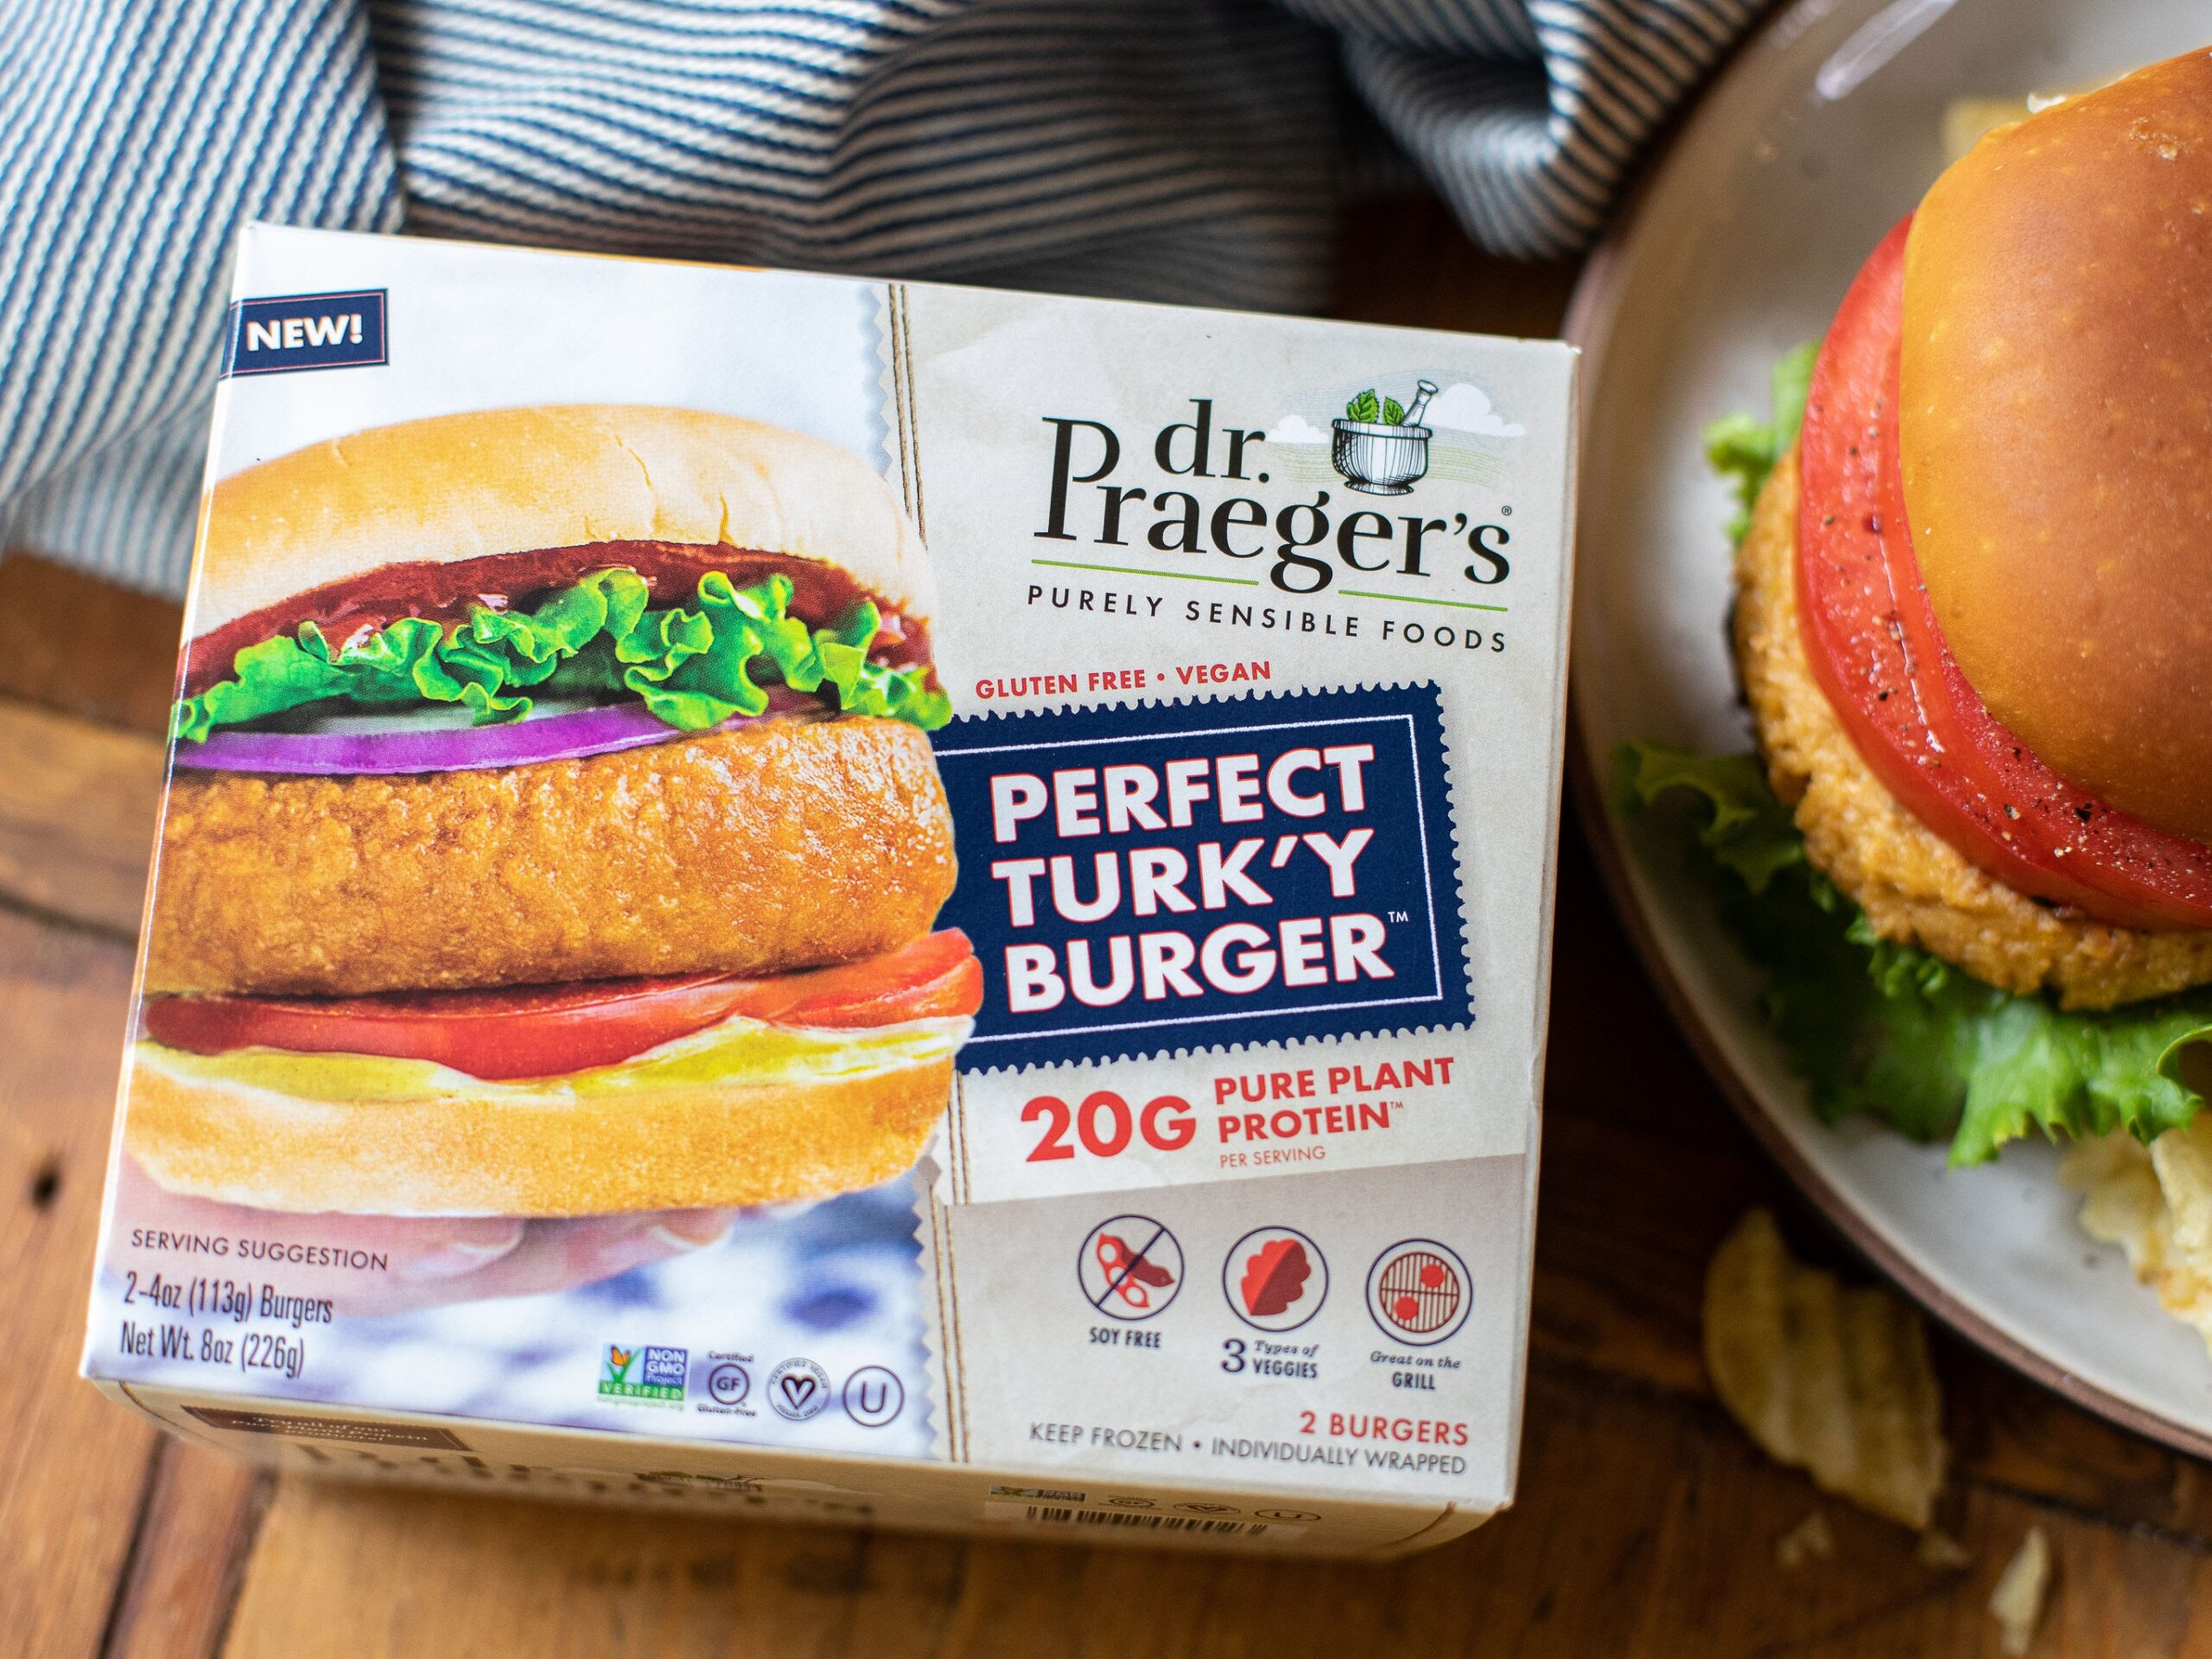 Get Dr Praeger’s Purely Sensible Items As Low As FREE At Publix